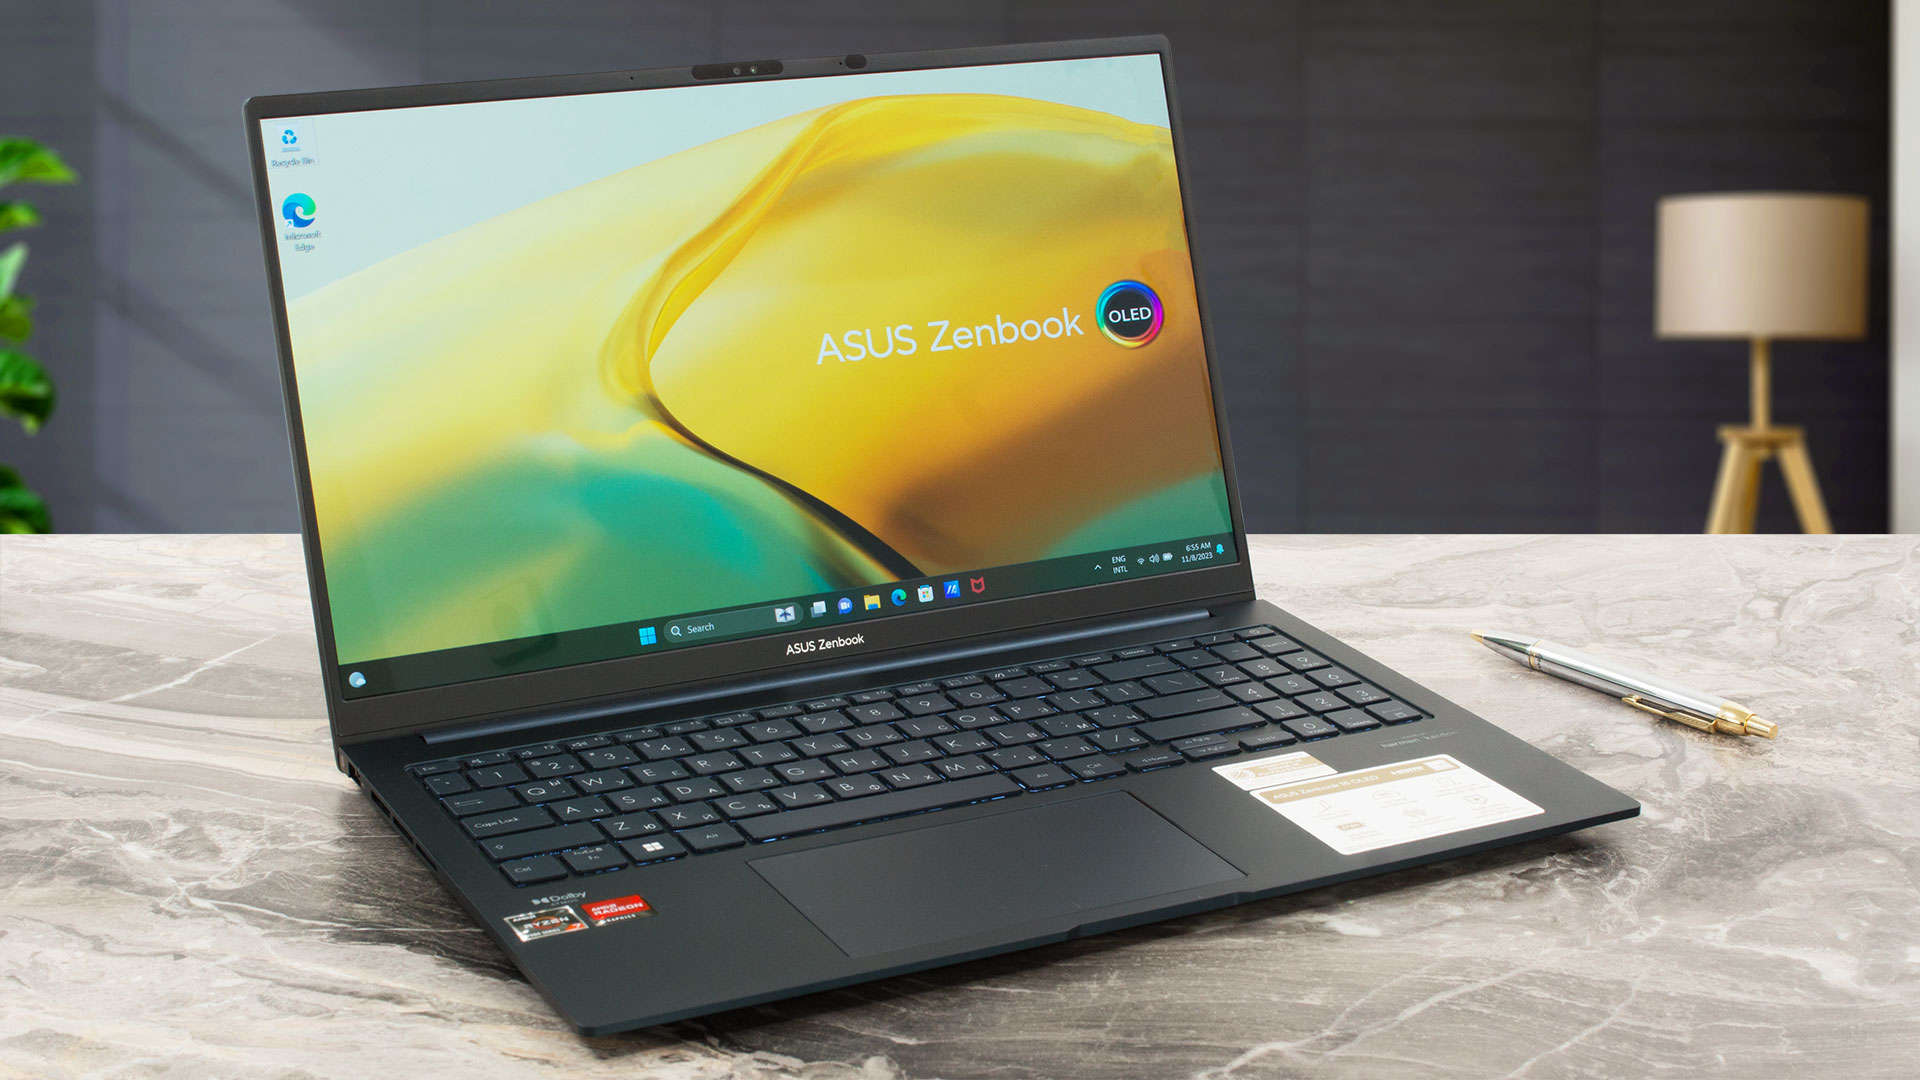 ASUS Zenbook 15 OLED (UM3504)｜Laptops For Home｜ASUS Singapore